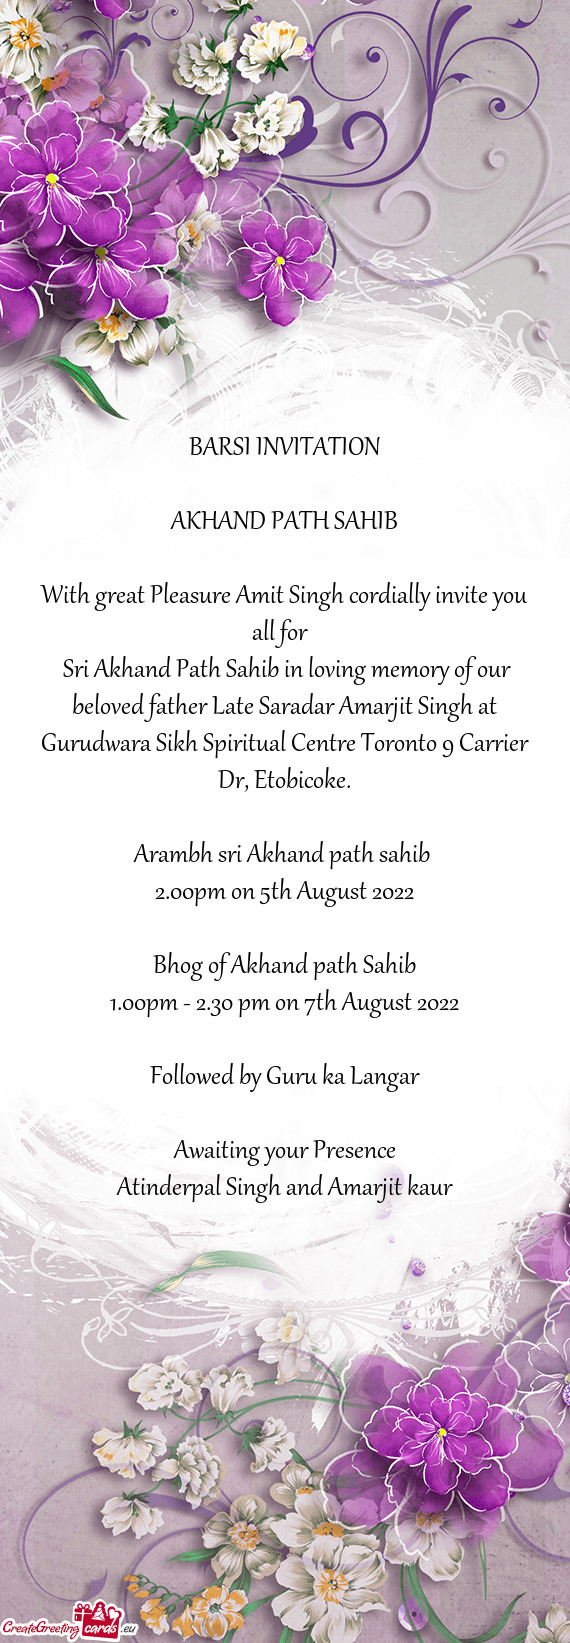 With great Pleasure Amit Singh cordially invite you all for